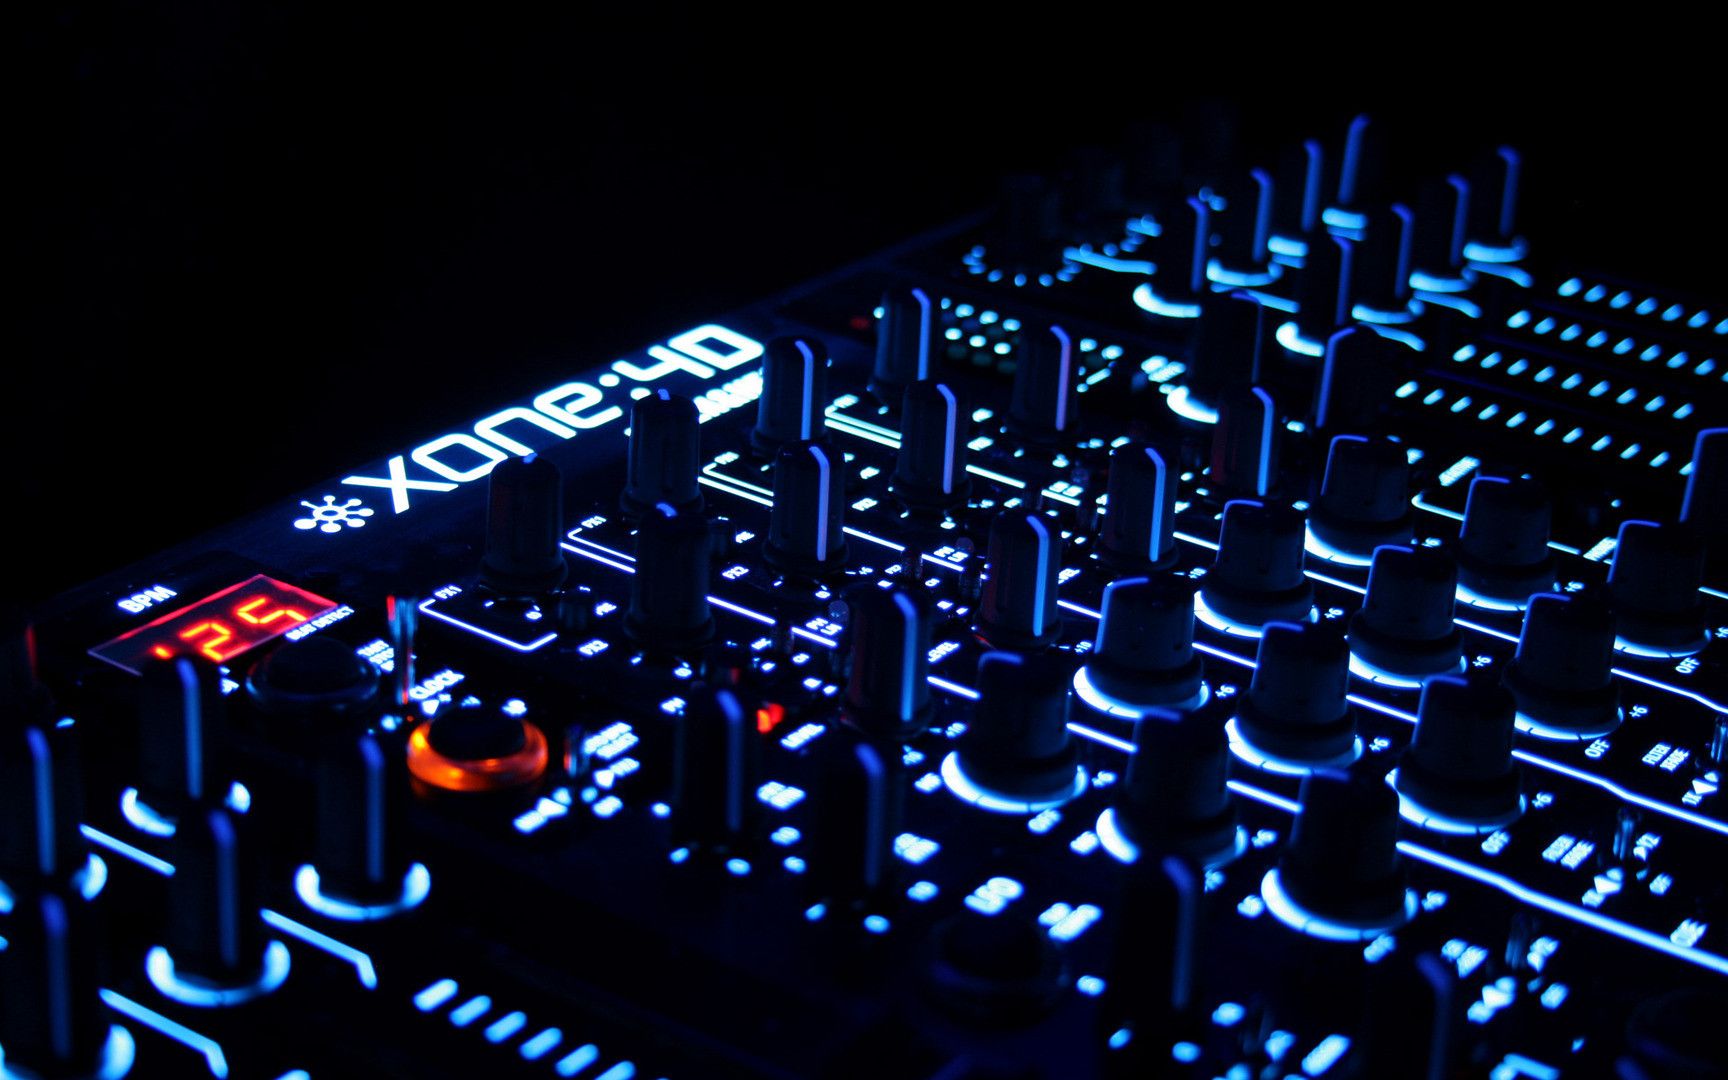 HD Dj Wallpaper For Mac Image And All To